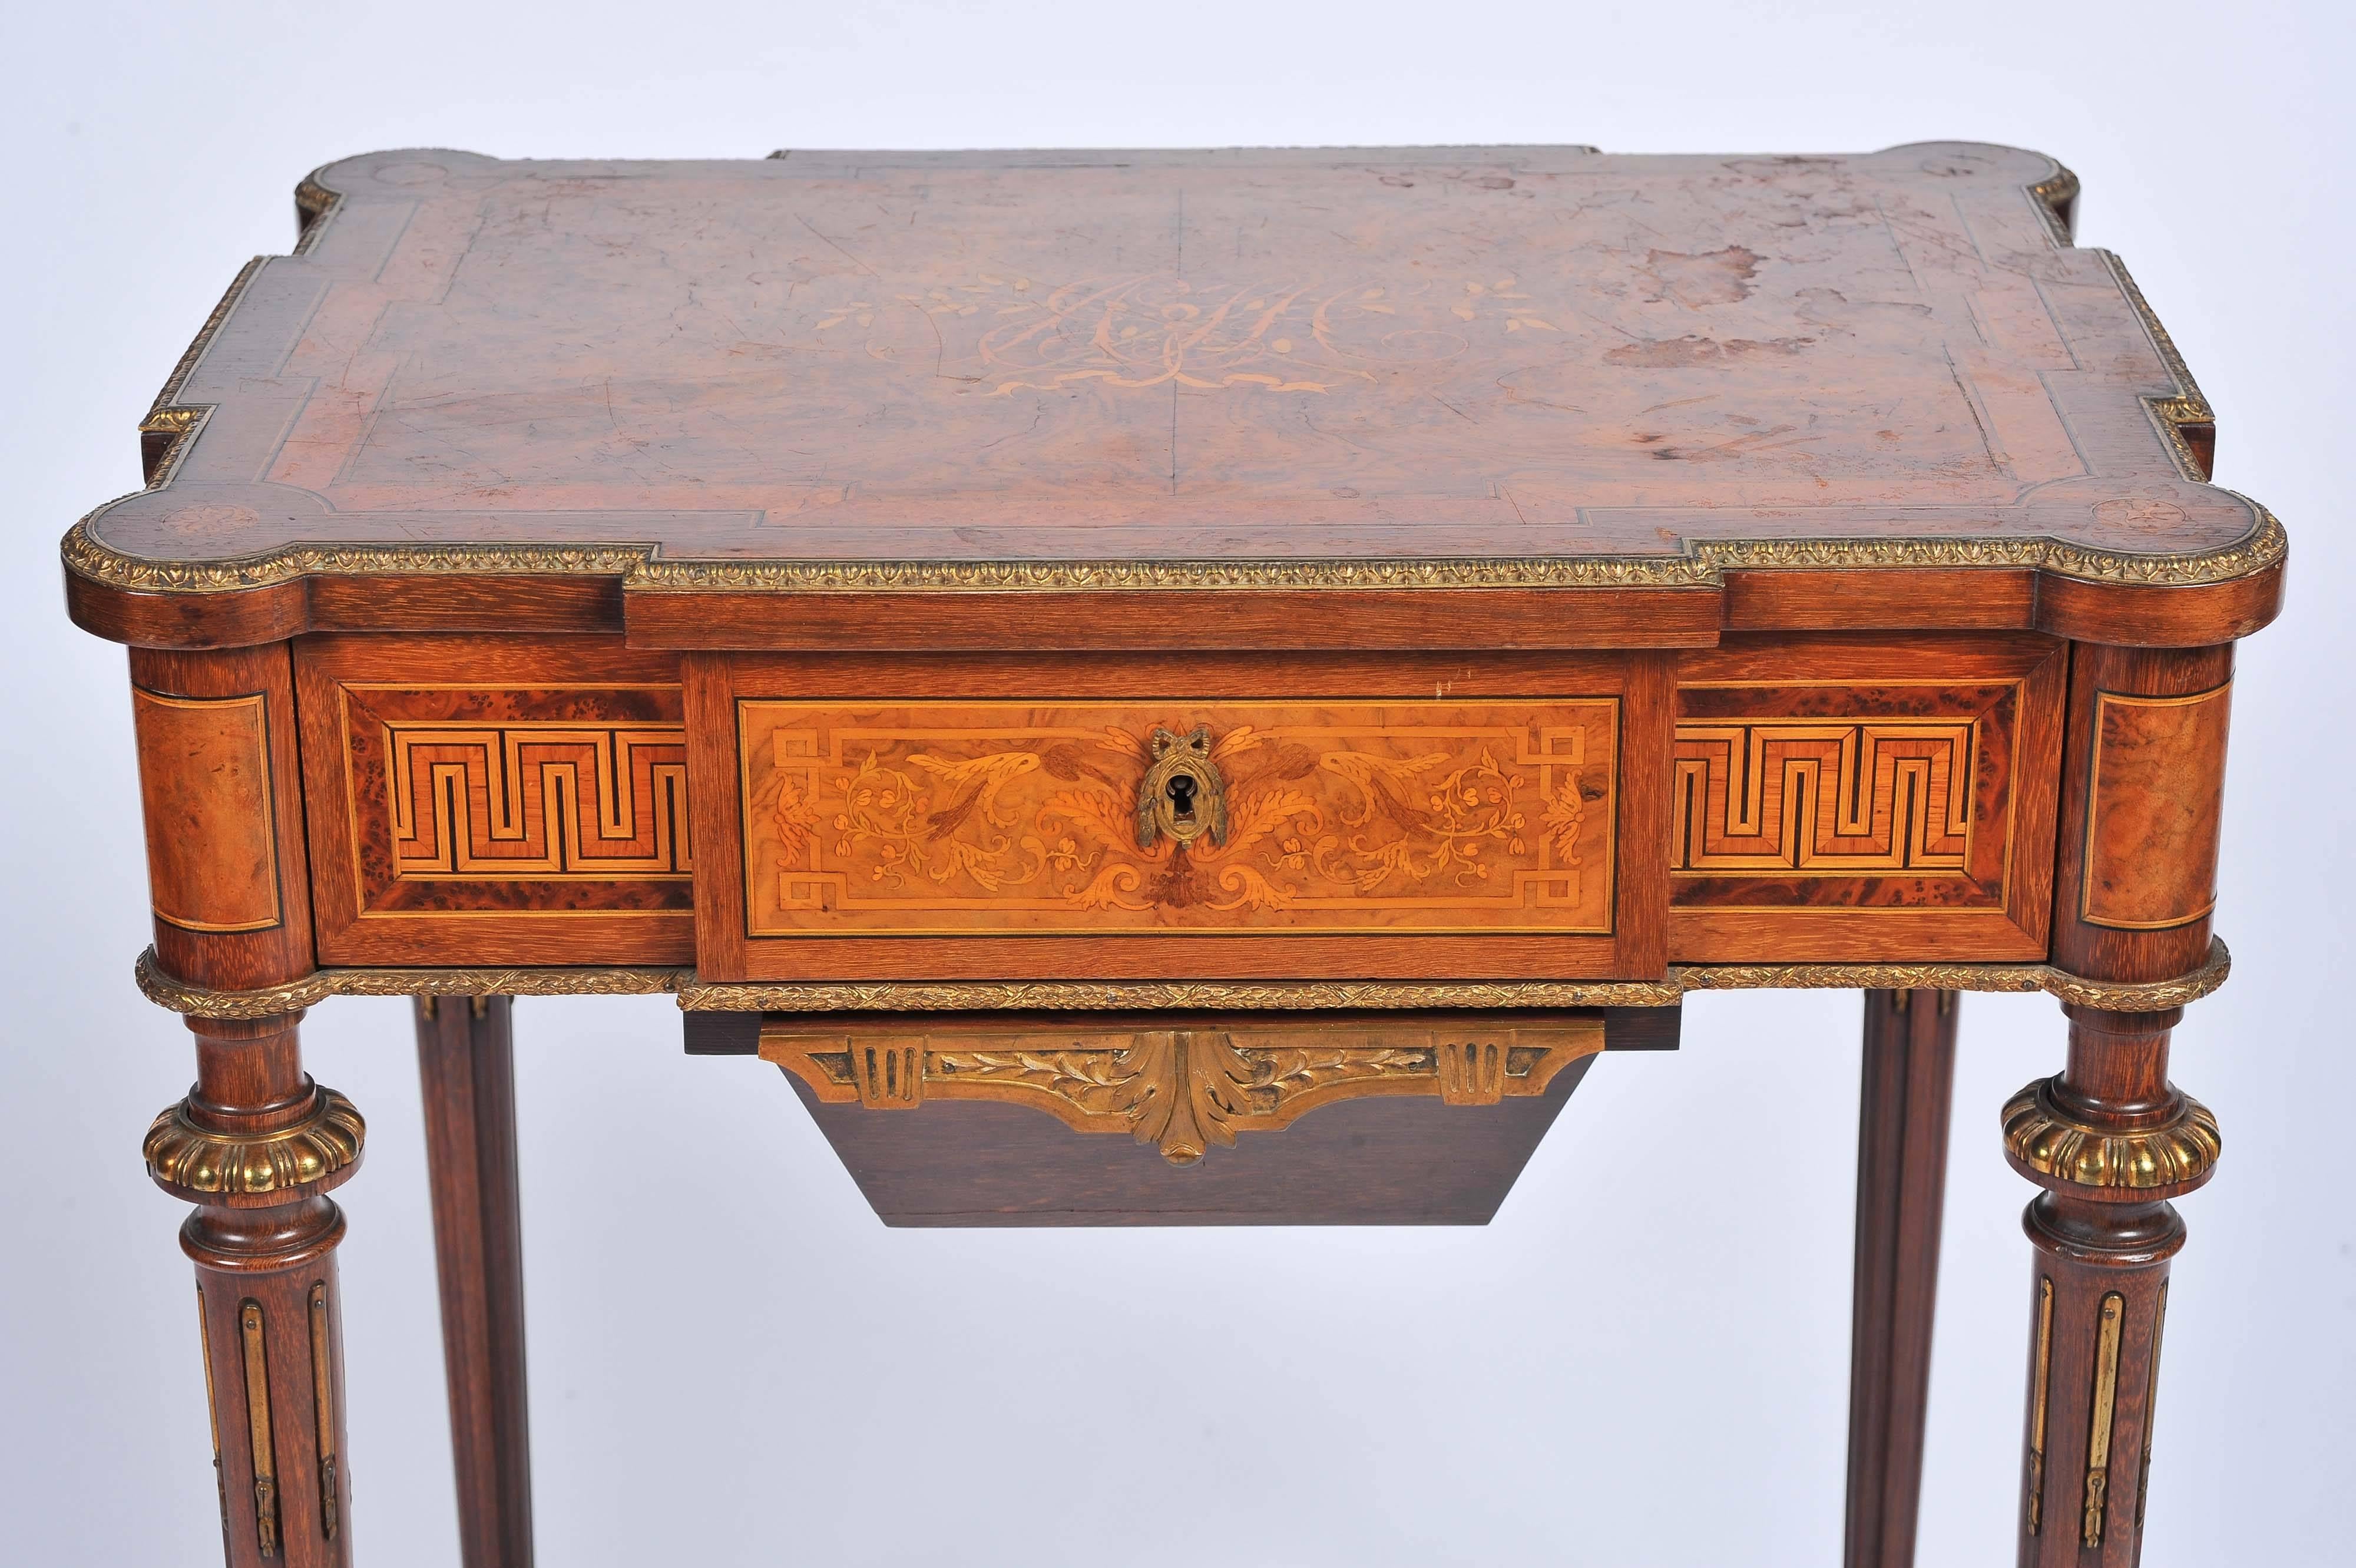 A very good quality 19th century French walnut work table. Having inlaid marquetry and parquetry decoration, the top opening to reveal a compartmented interior, also having a sliding work box beneath. Raised on turned tapering legs that are united